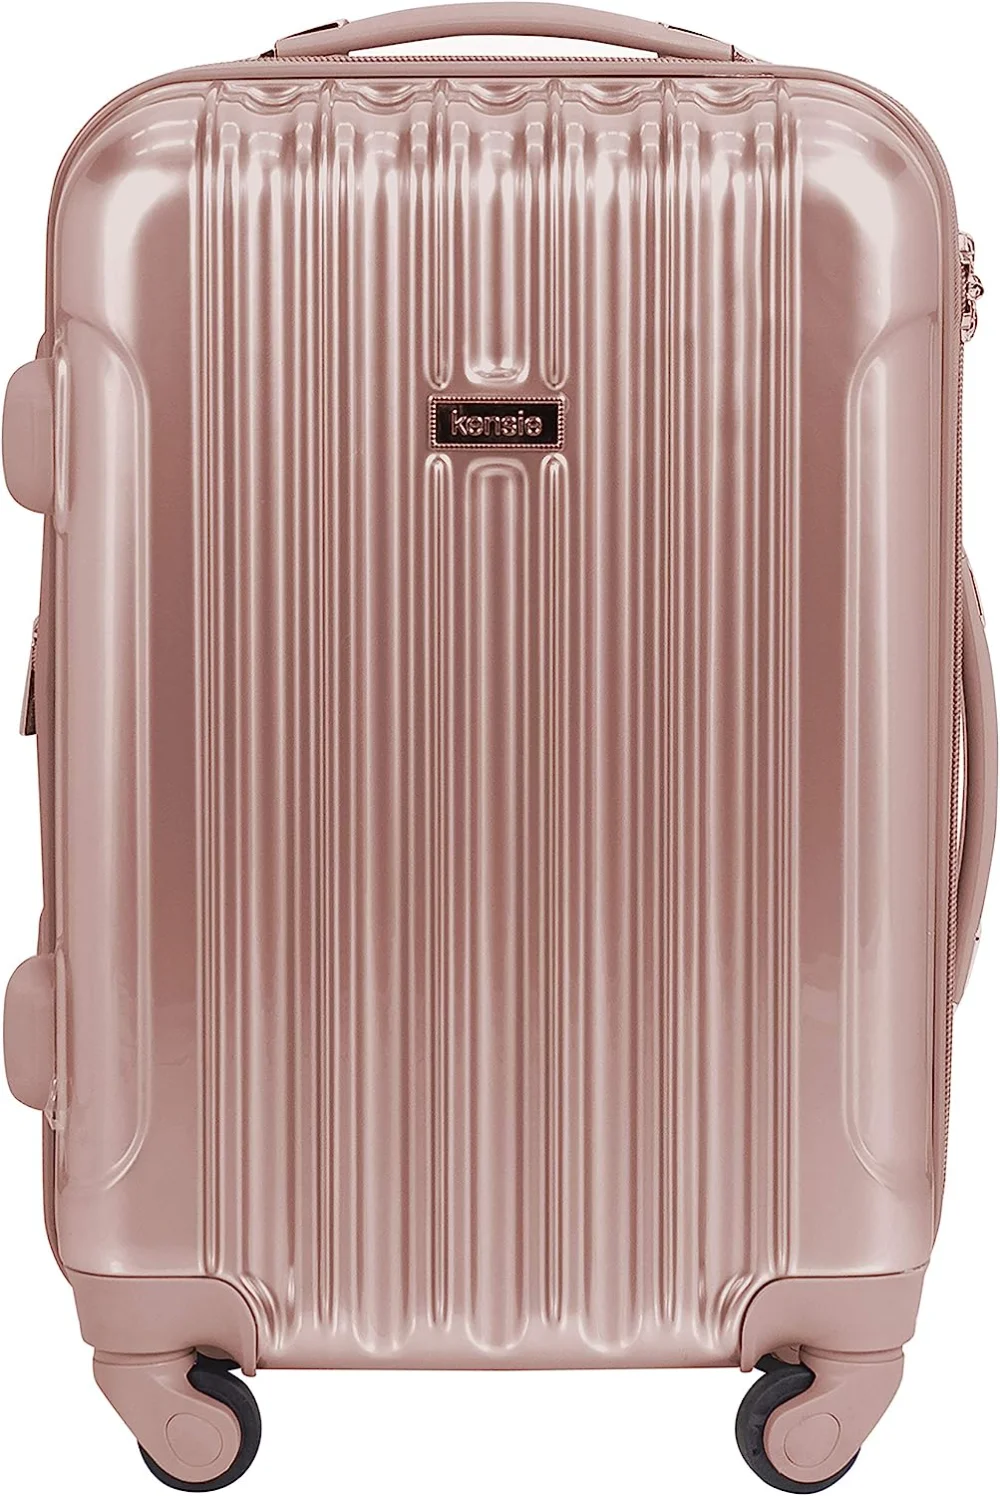 

kensie Women's Alma Hardside Spinner Luggage, Expandable, Rose Gold, Sets Rolling Luggage Carry-On 20-Inch 20" Carry-on